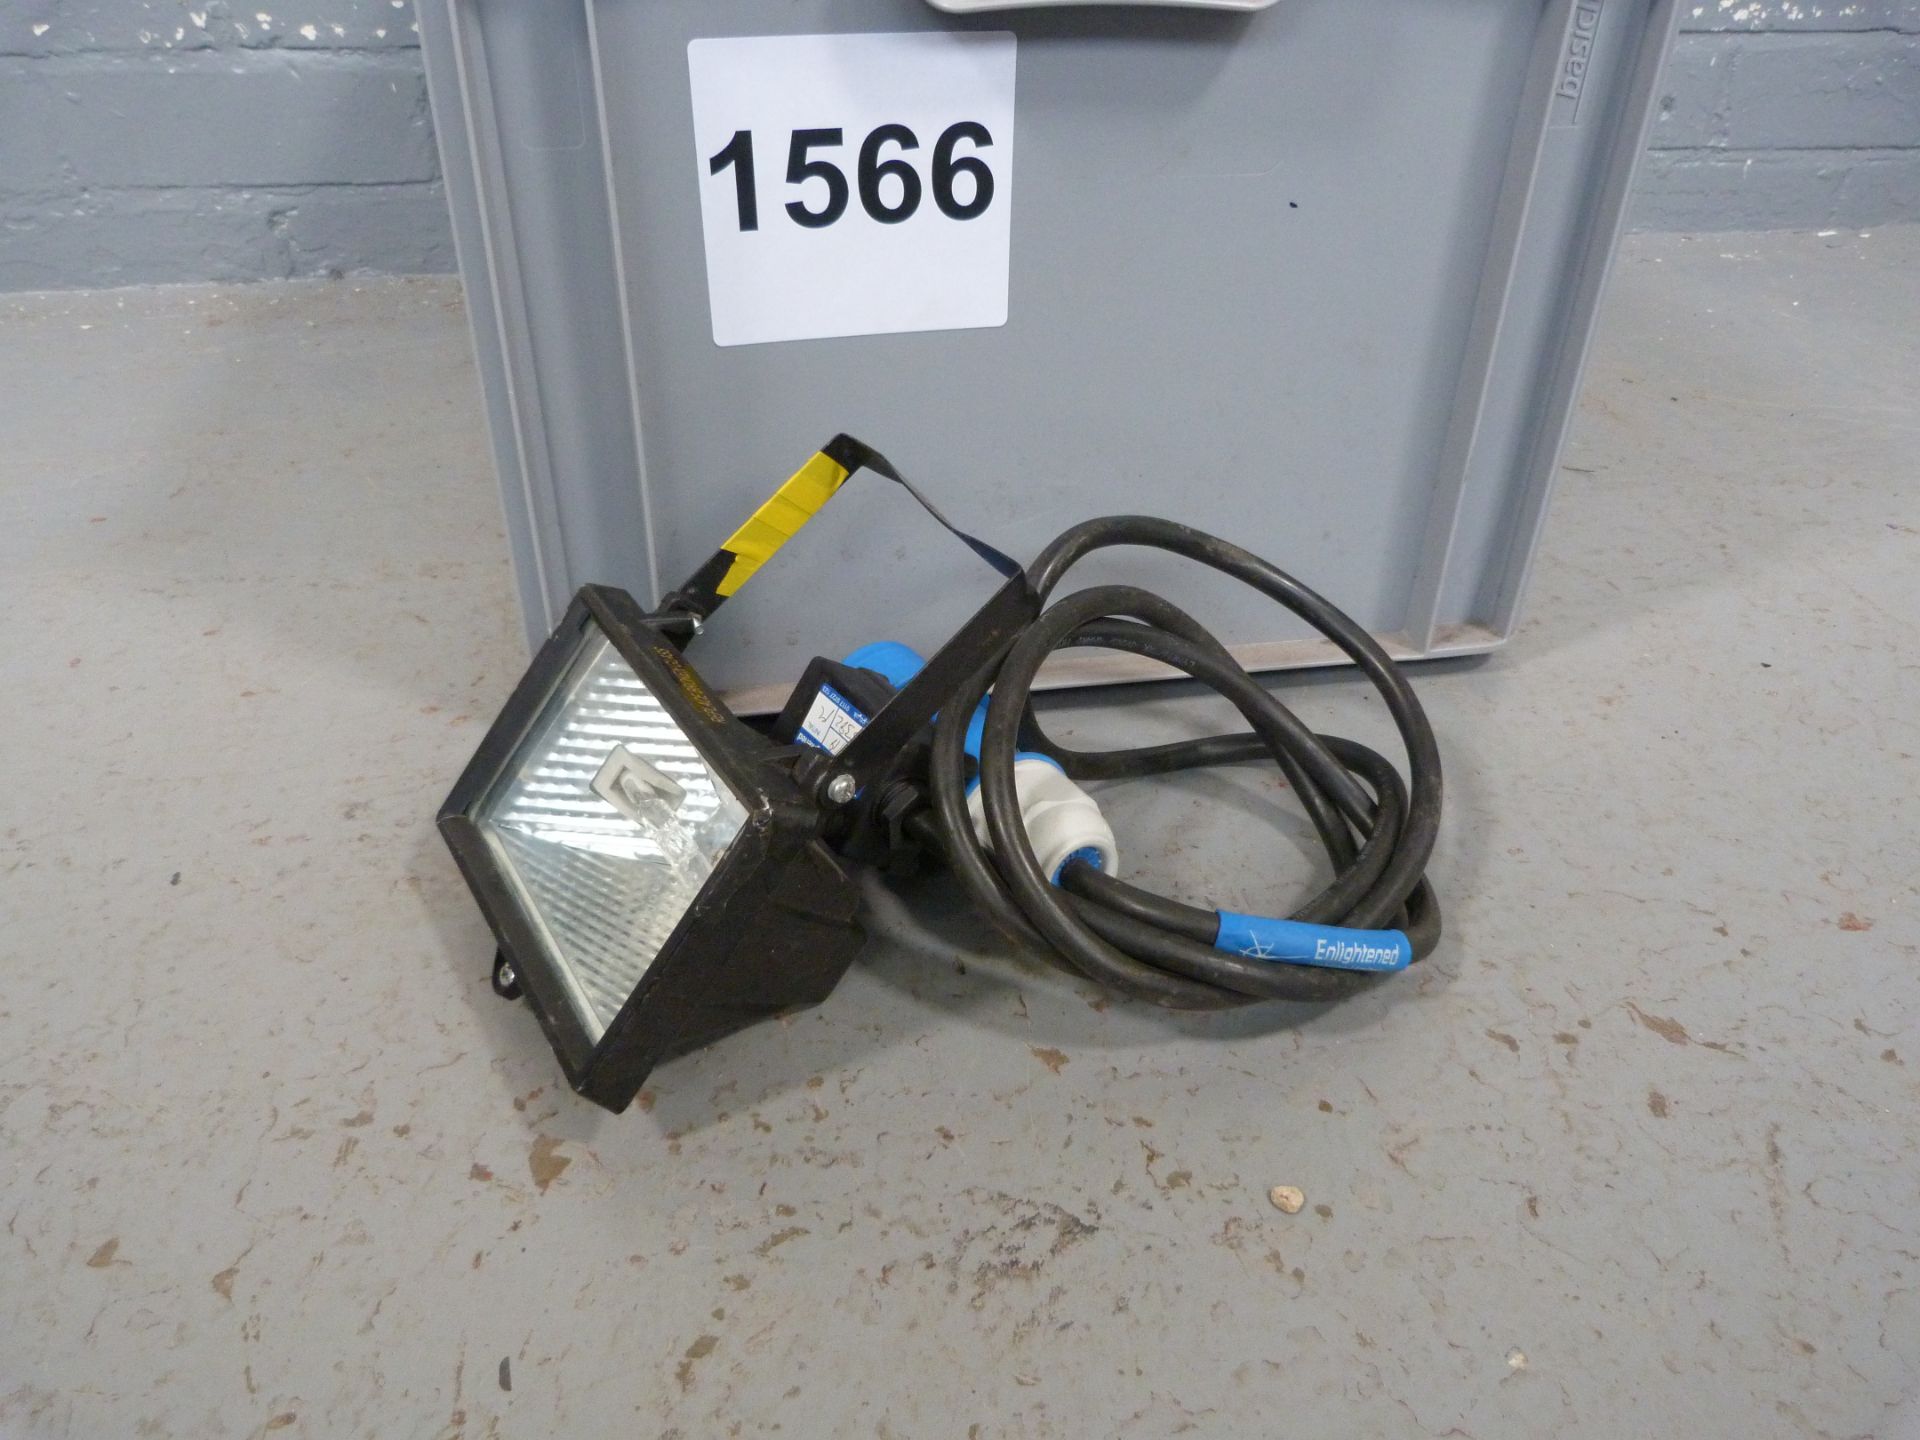 10x 150w IP44 Halogen Floodlight fitted with 16a Connectors. Box not included. Ex-Hire, all fittings - Image 2 of 5